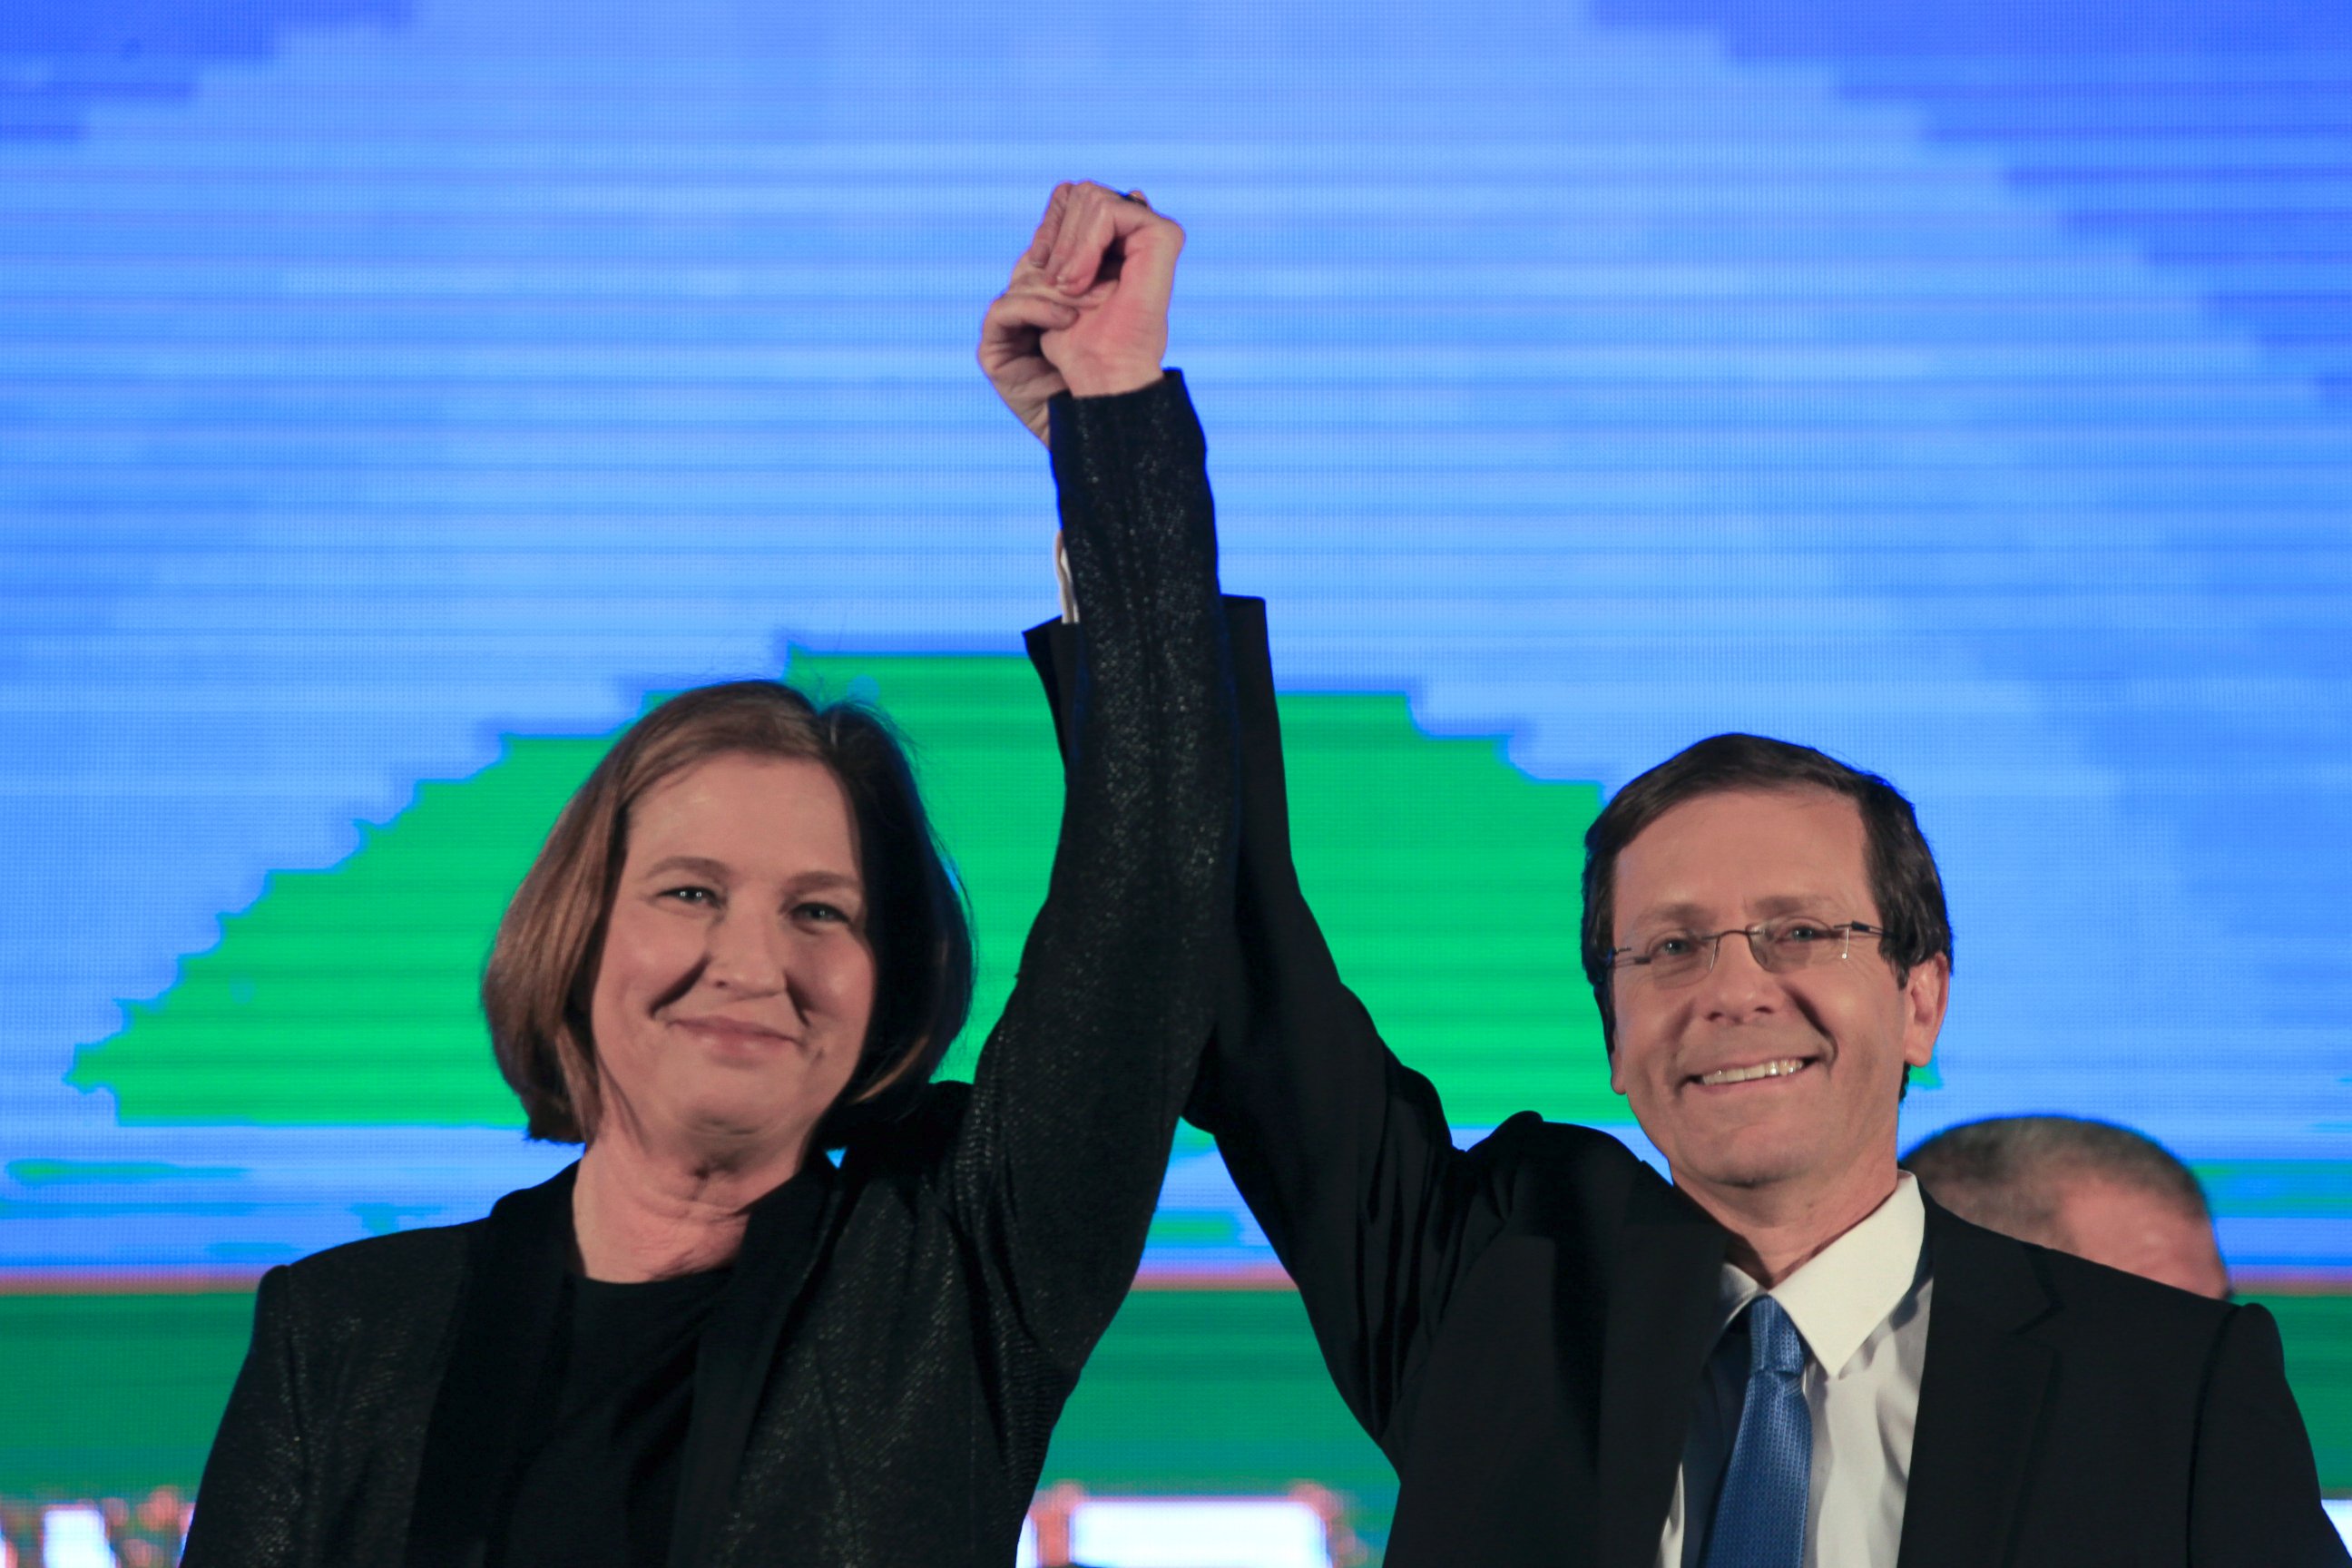 PHOTO: Zionist Union party co-leadesr Isaac Hezcog, right, and Tzipi Livni greet supporters at the party's election headquarters in Tel Aviv, March 18, 2015.